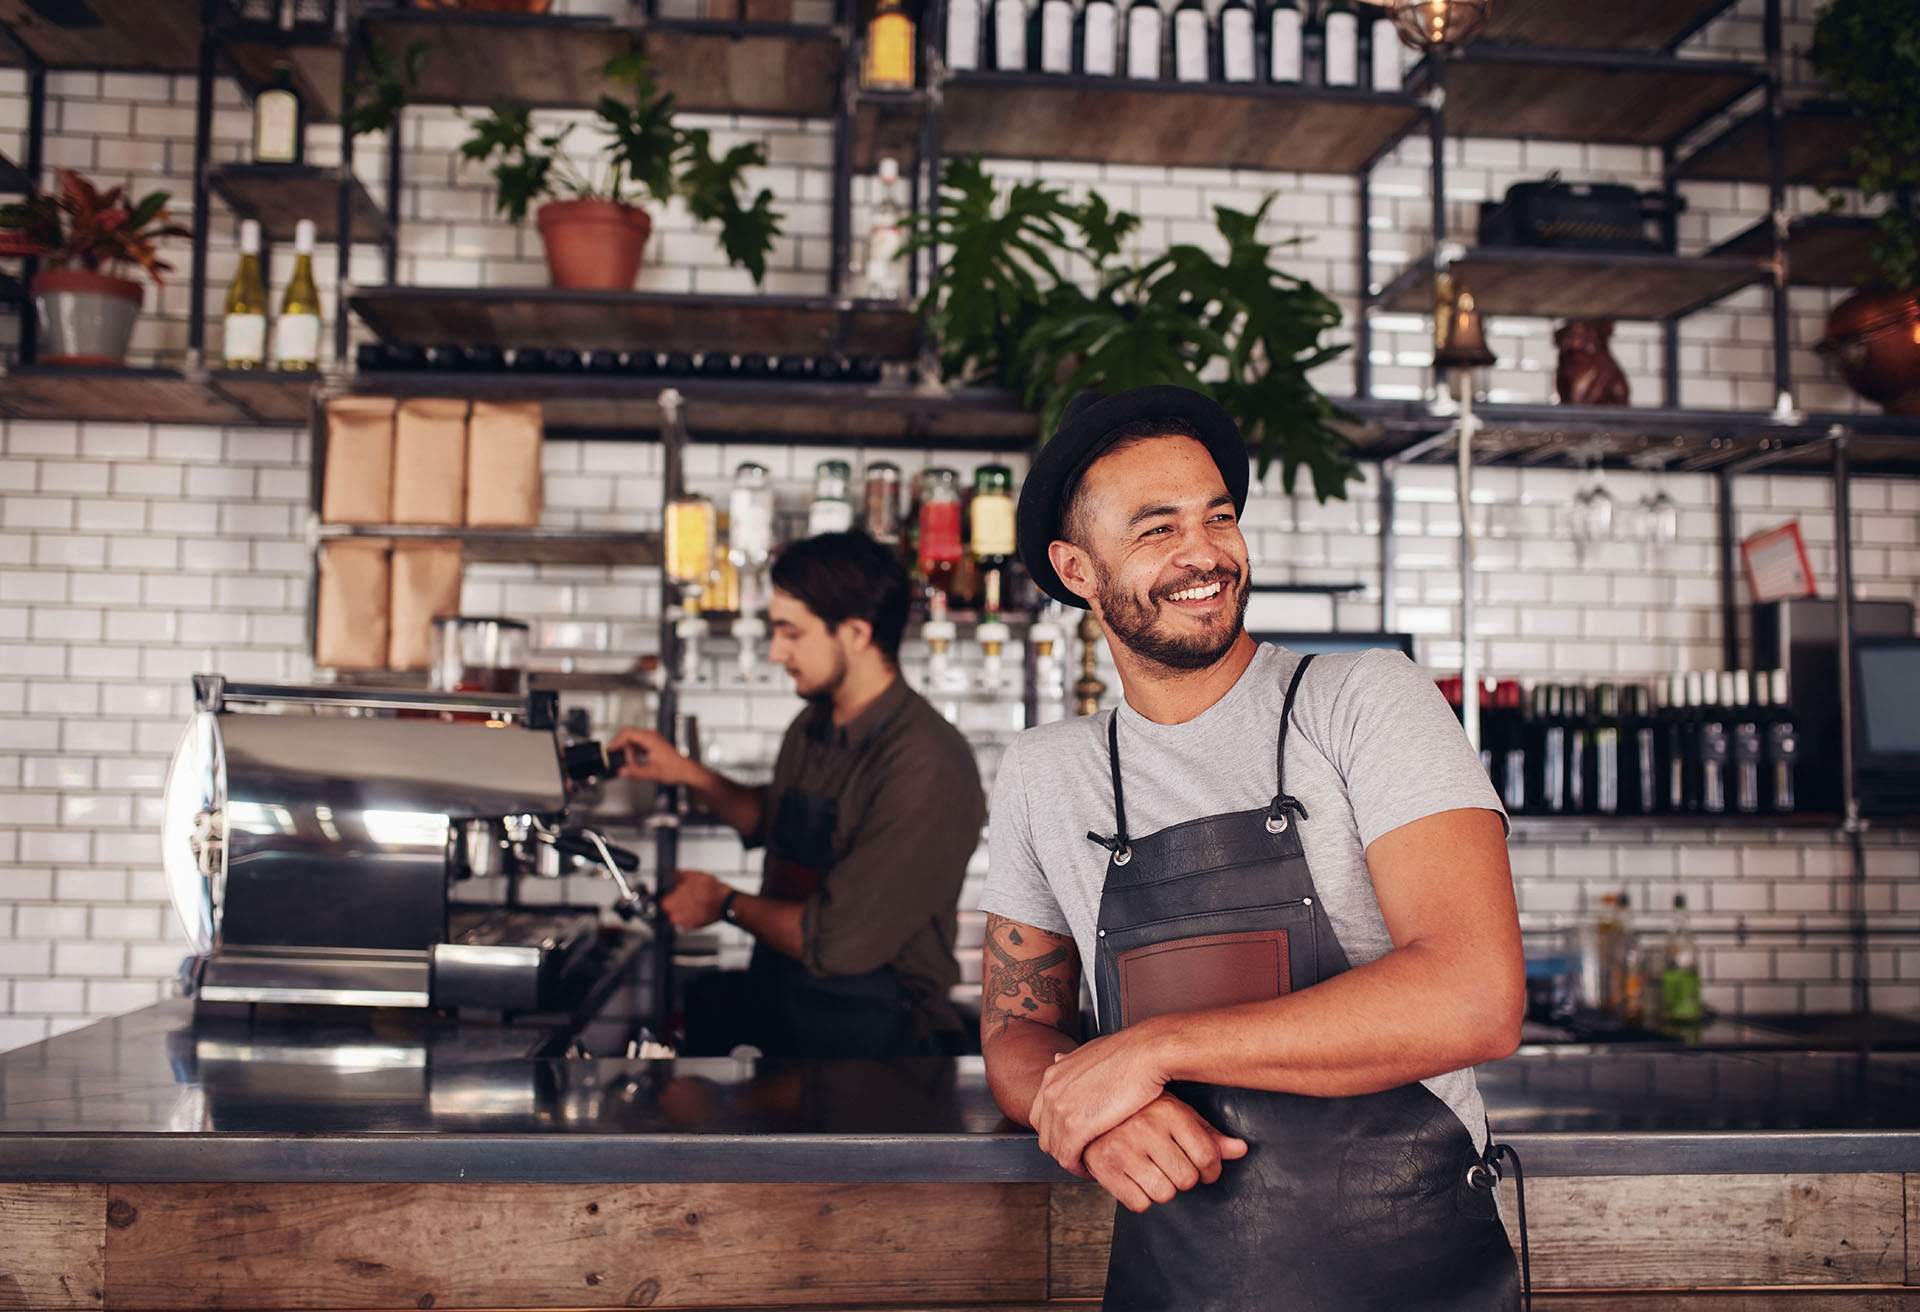 A waiter leaning on the bar counter and smiling. They wear an apron and a tshirt